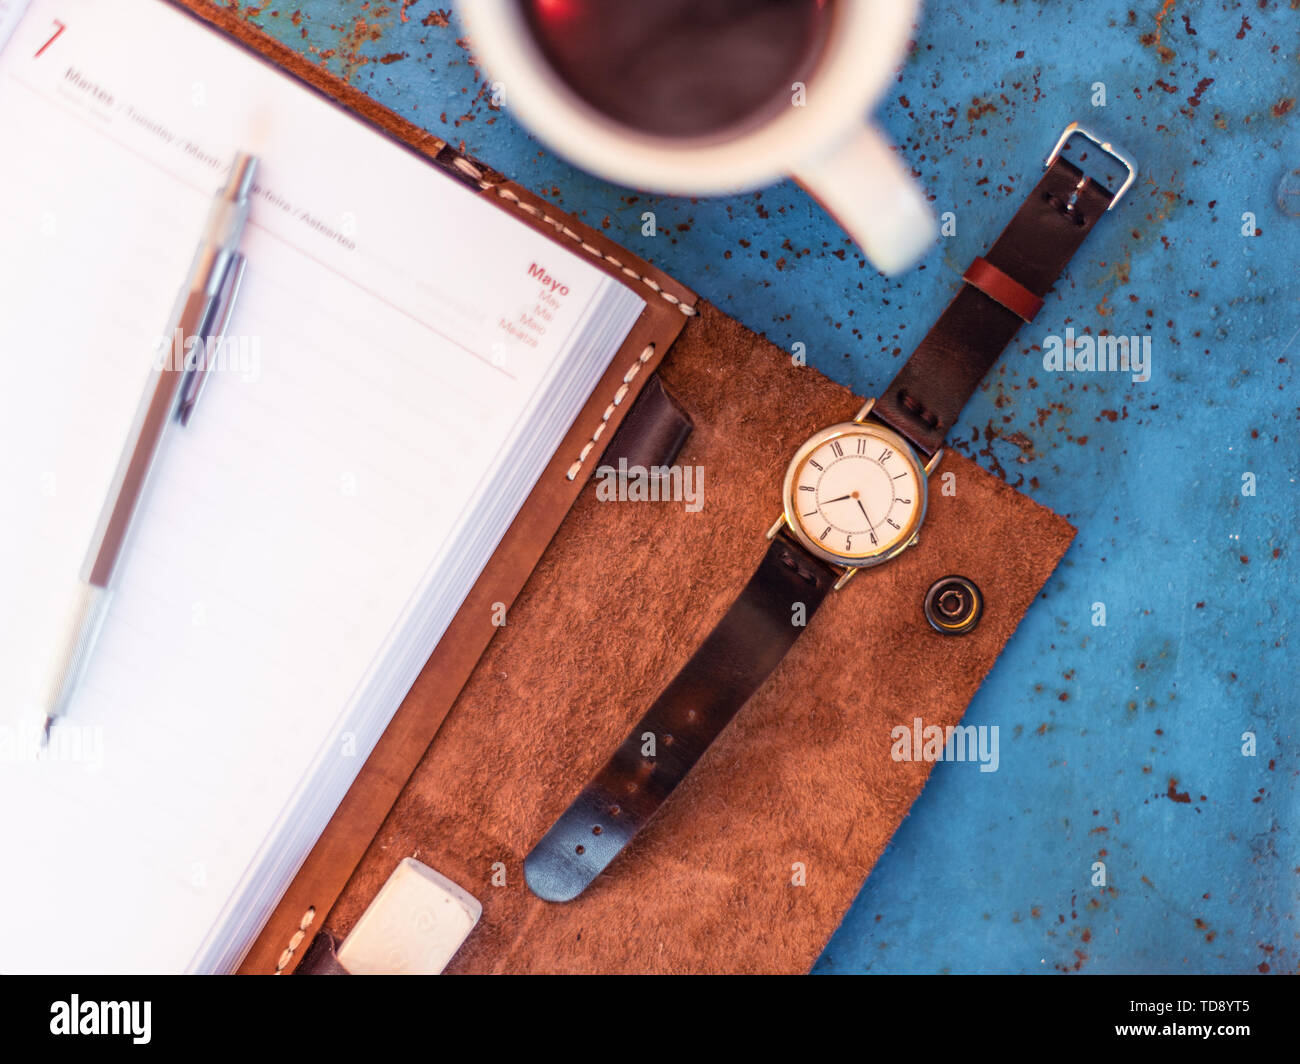 Vintage wrist watch and leather diary on rustic blue metal bench suggesting the time is 07.00, a cup of coffee in the edge of frame. Stock Photo